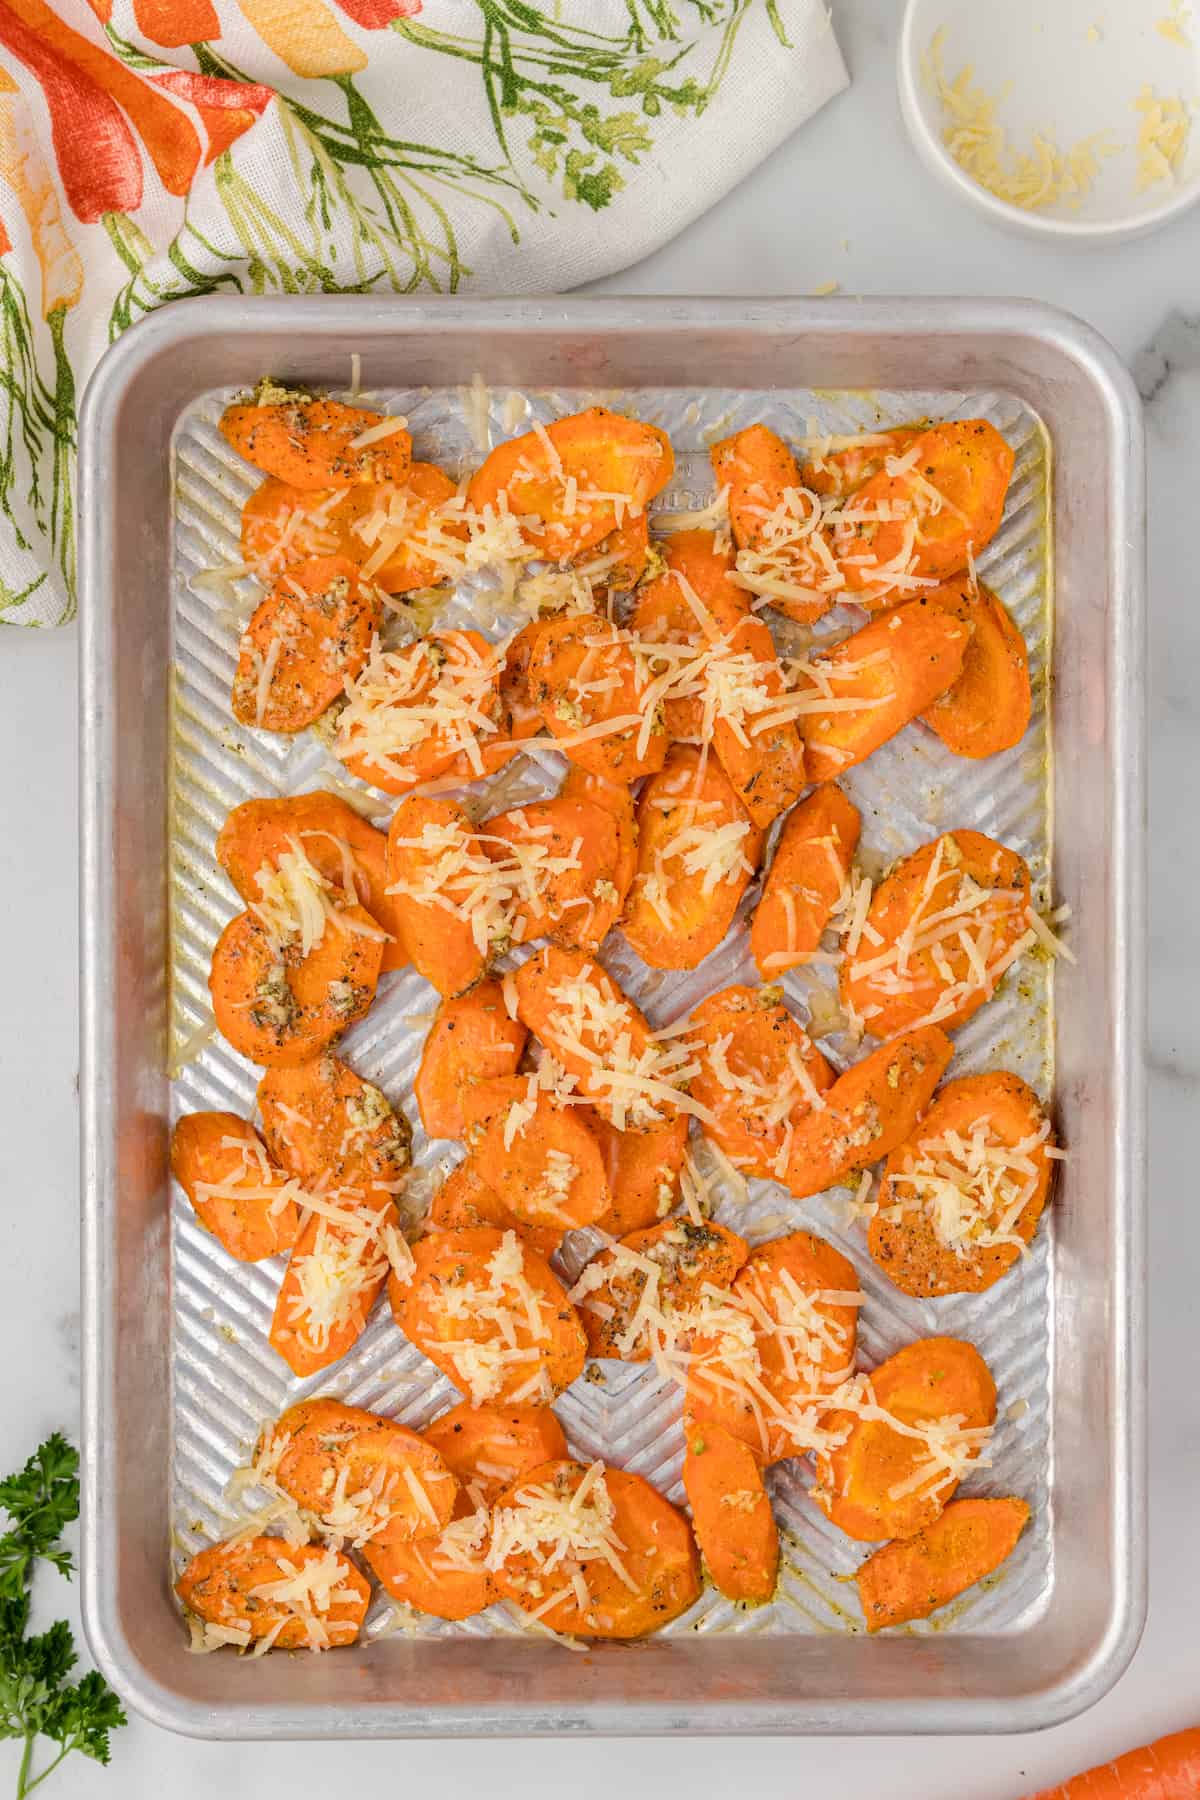 sprinkle the carrots with Parmesan cheese